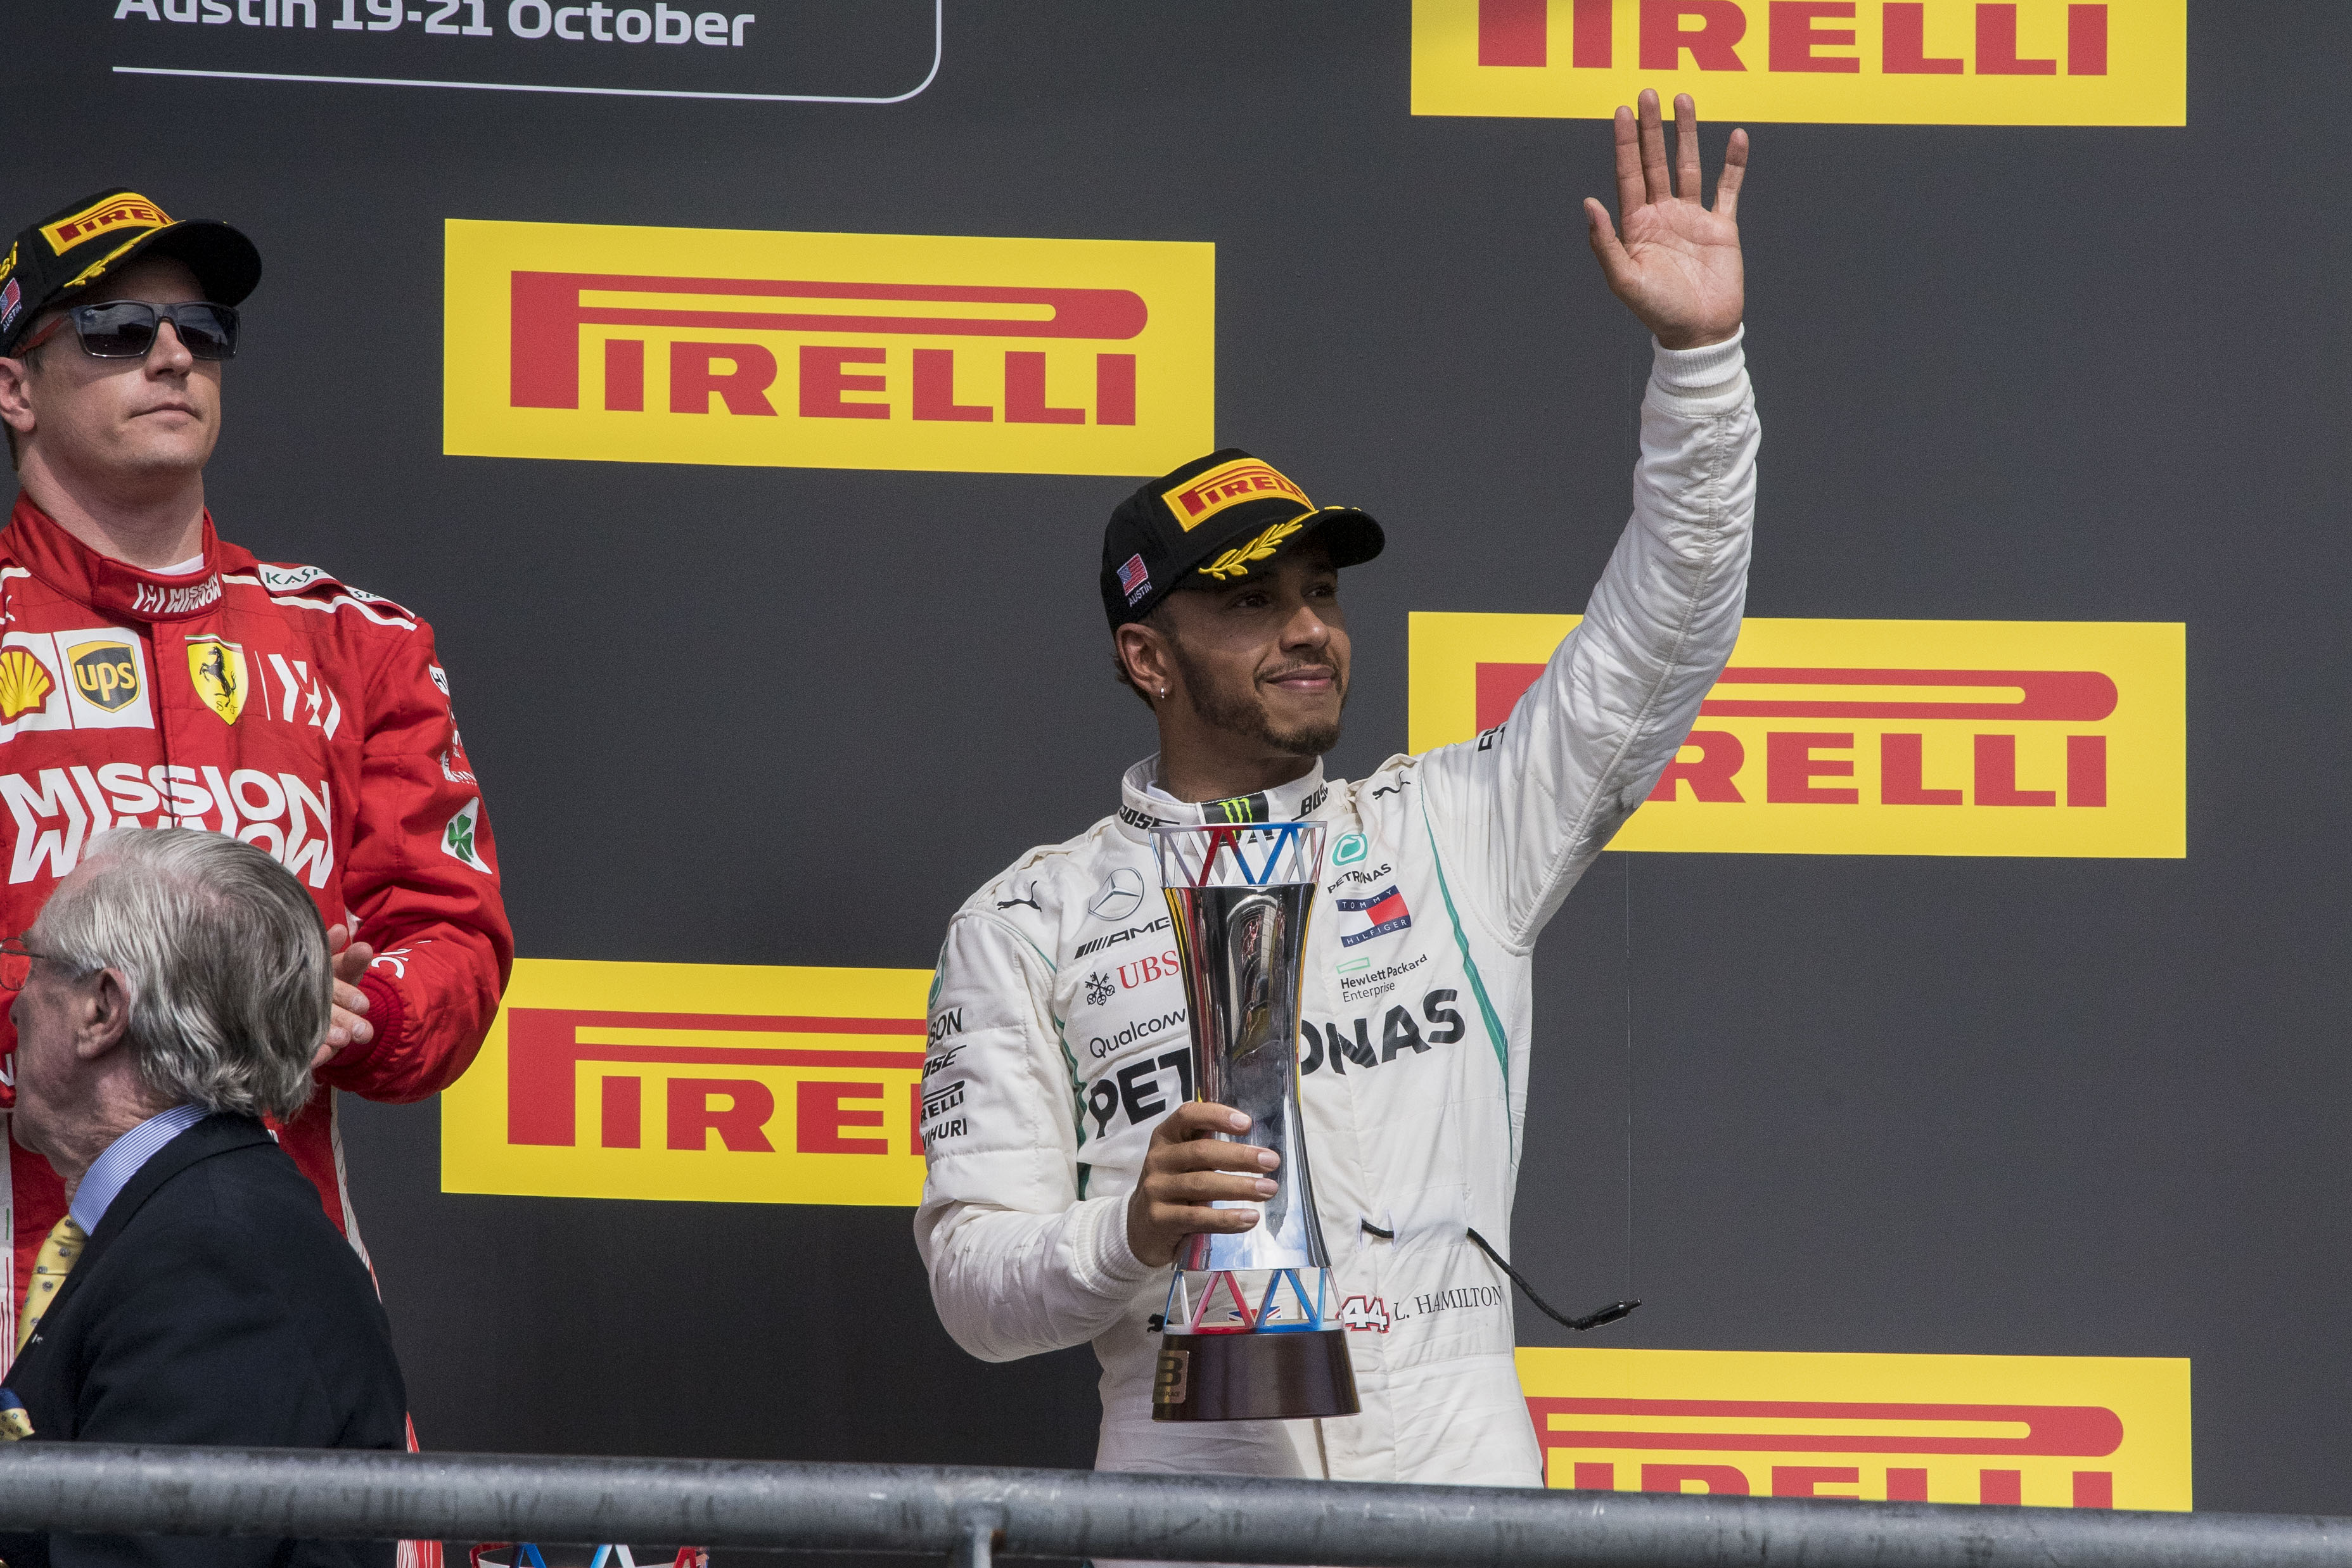 Motorsport: Hamilton heading for another Mexican coronation